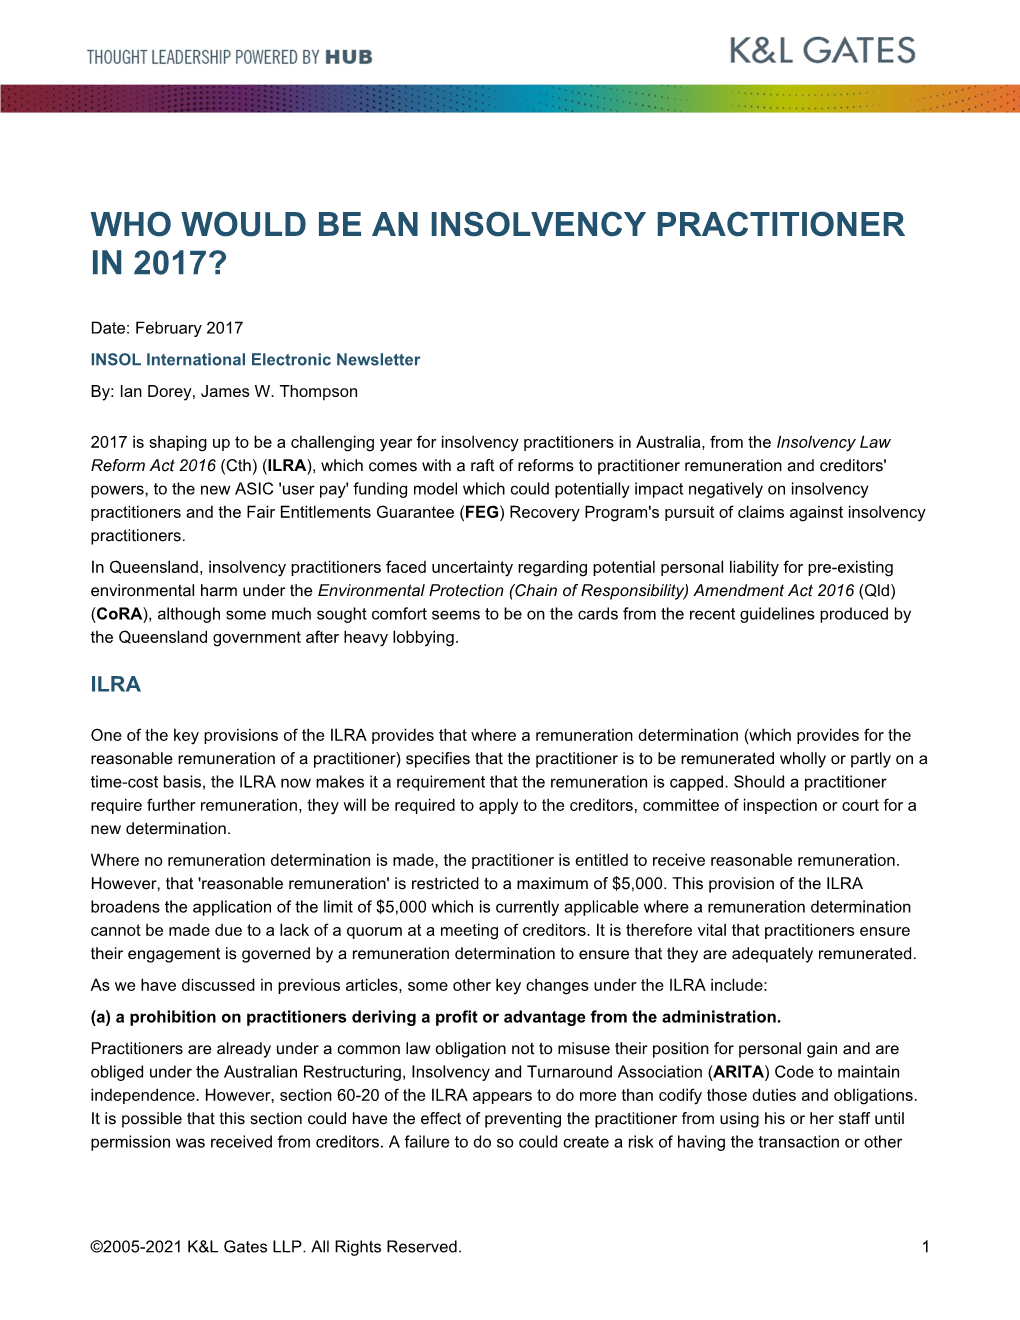 Who Would Be an Insolvency Practitioner in 2017?